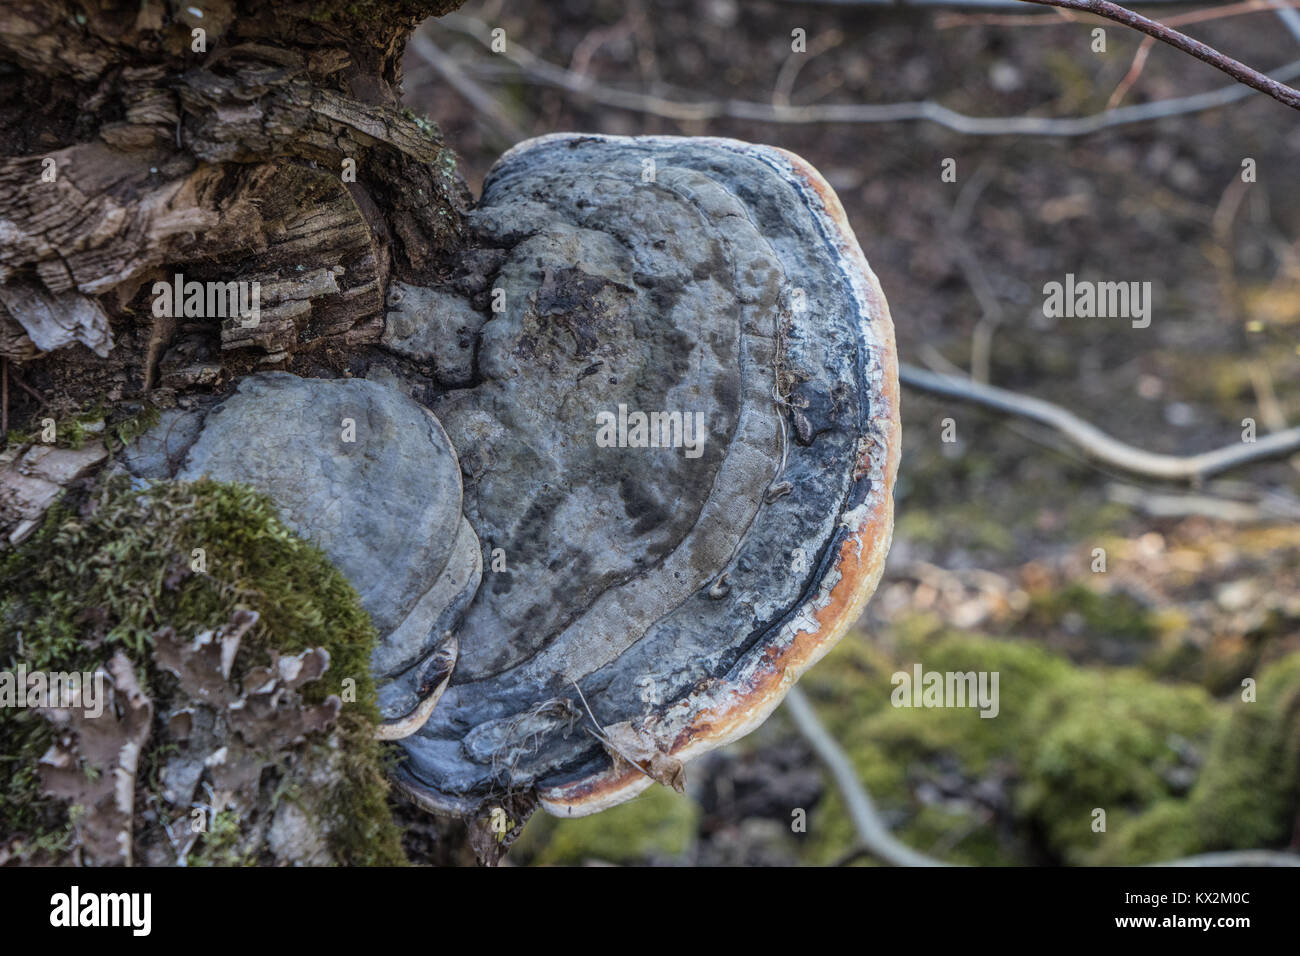 Parasite fungus growing on a tree trunk Stock Photo